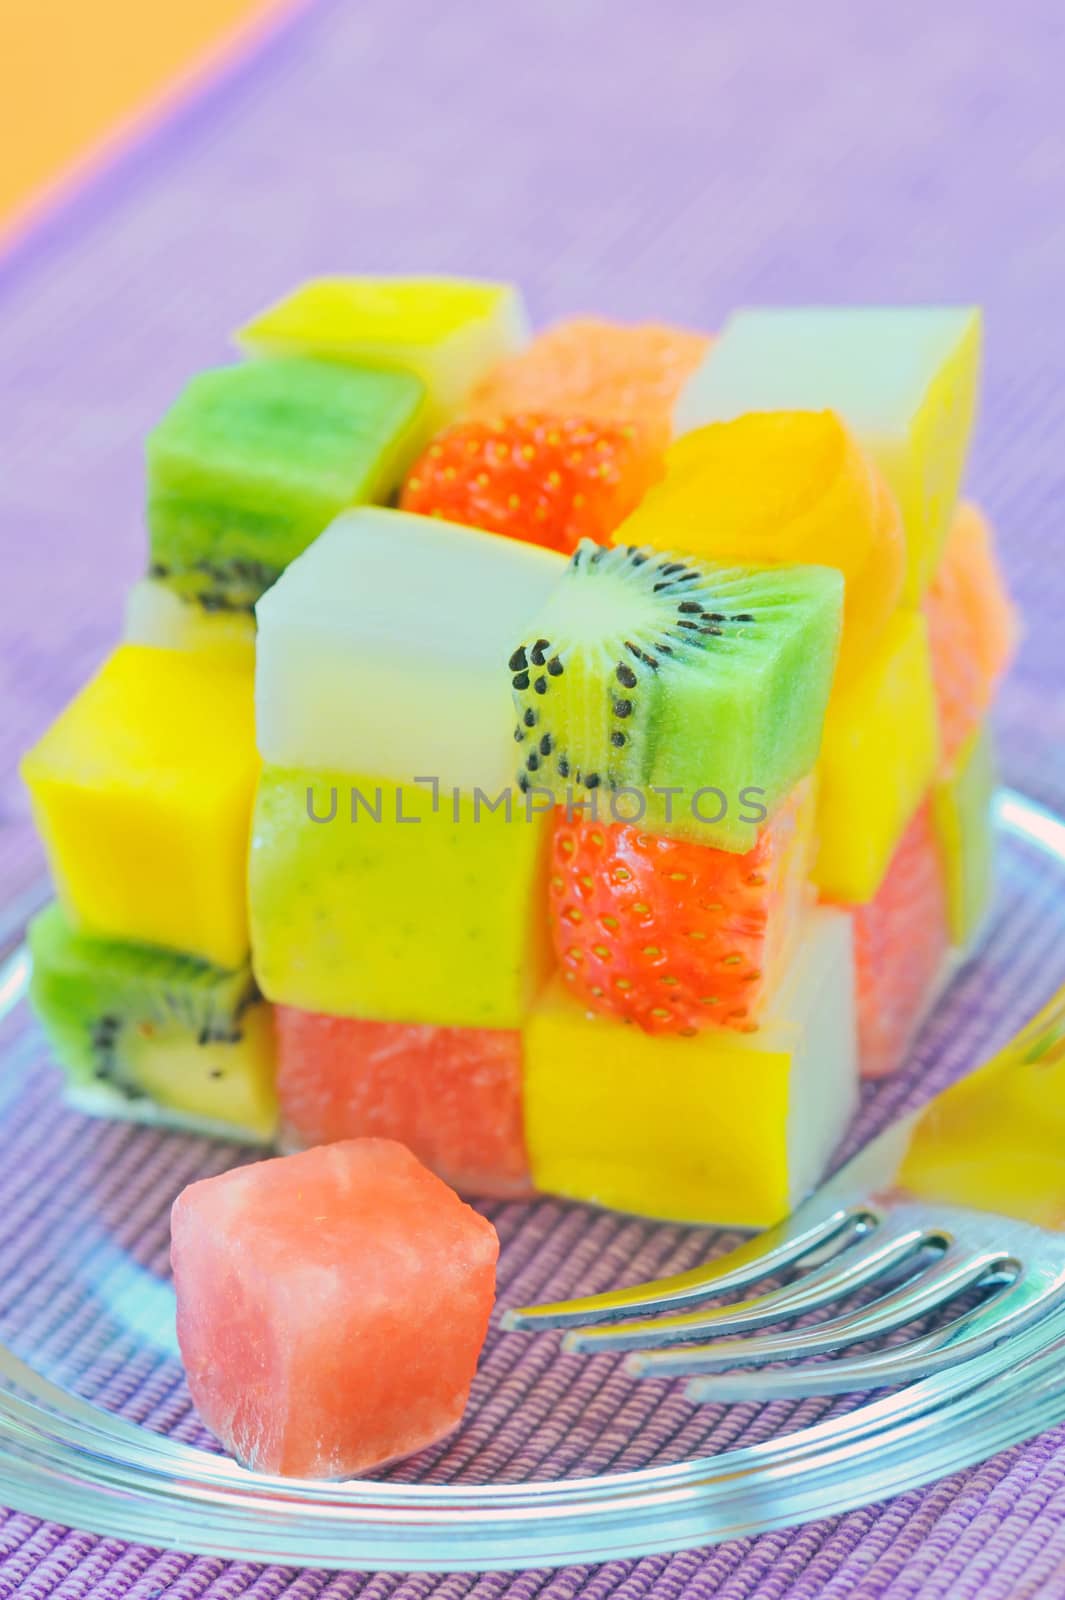 cube fruits salad by mady70